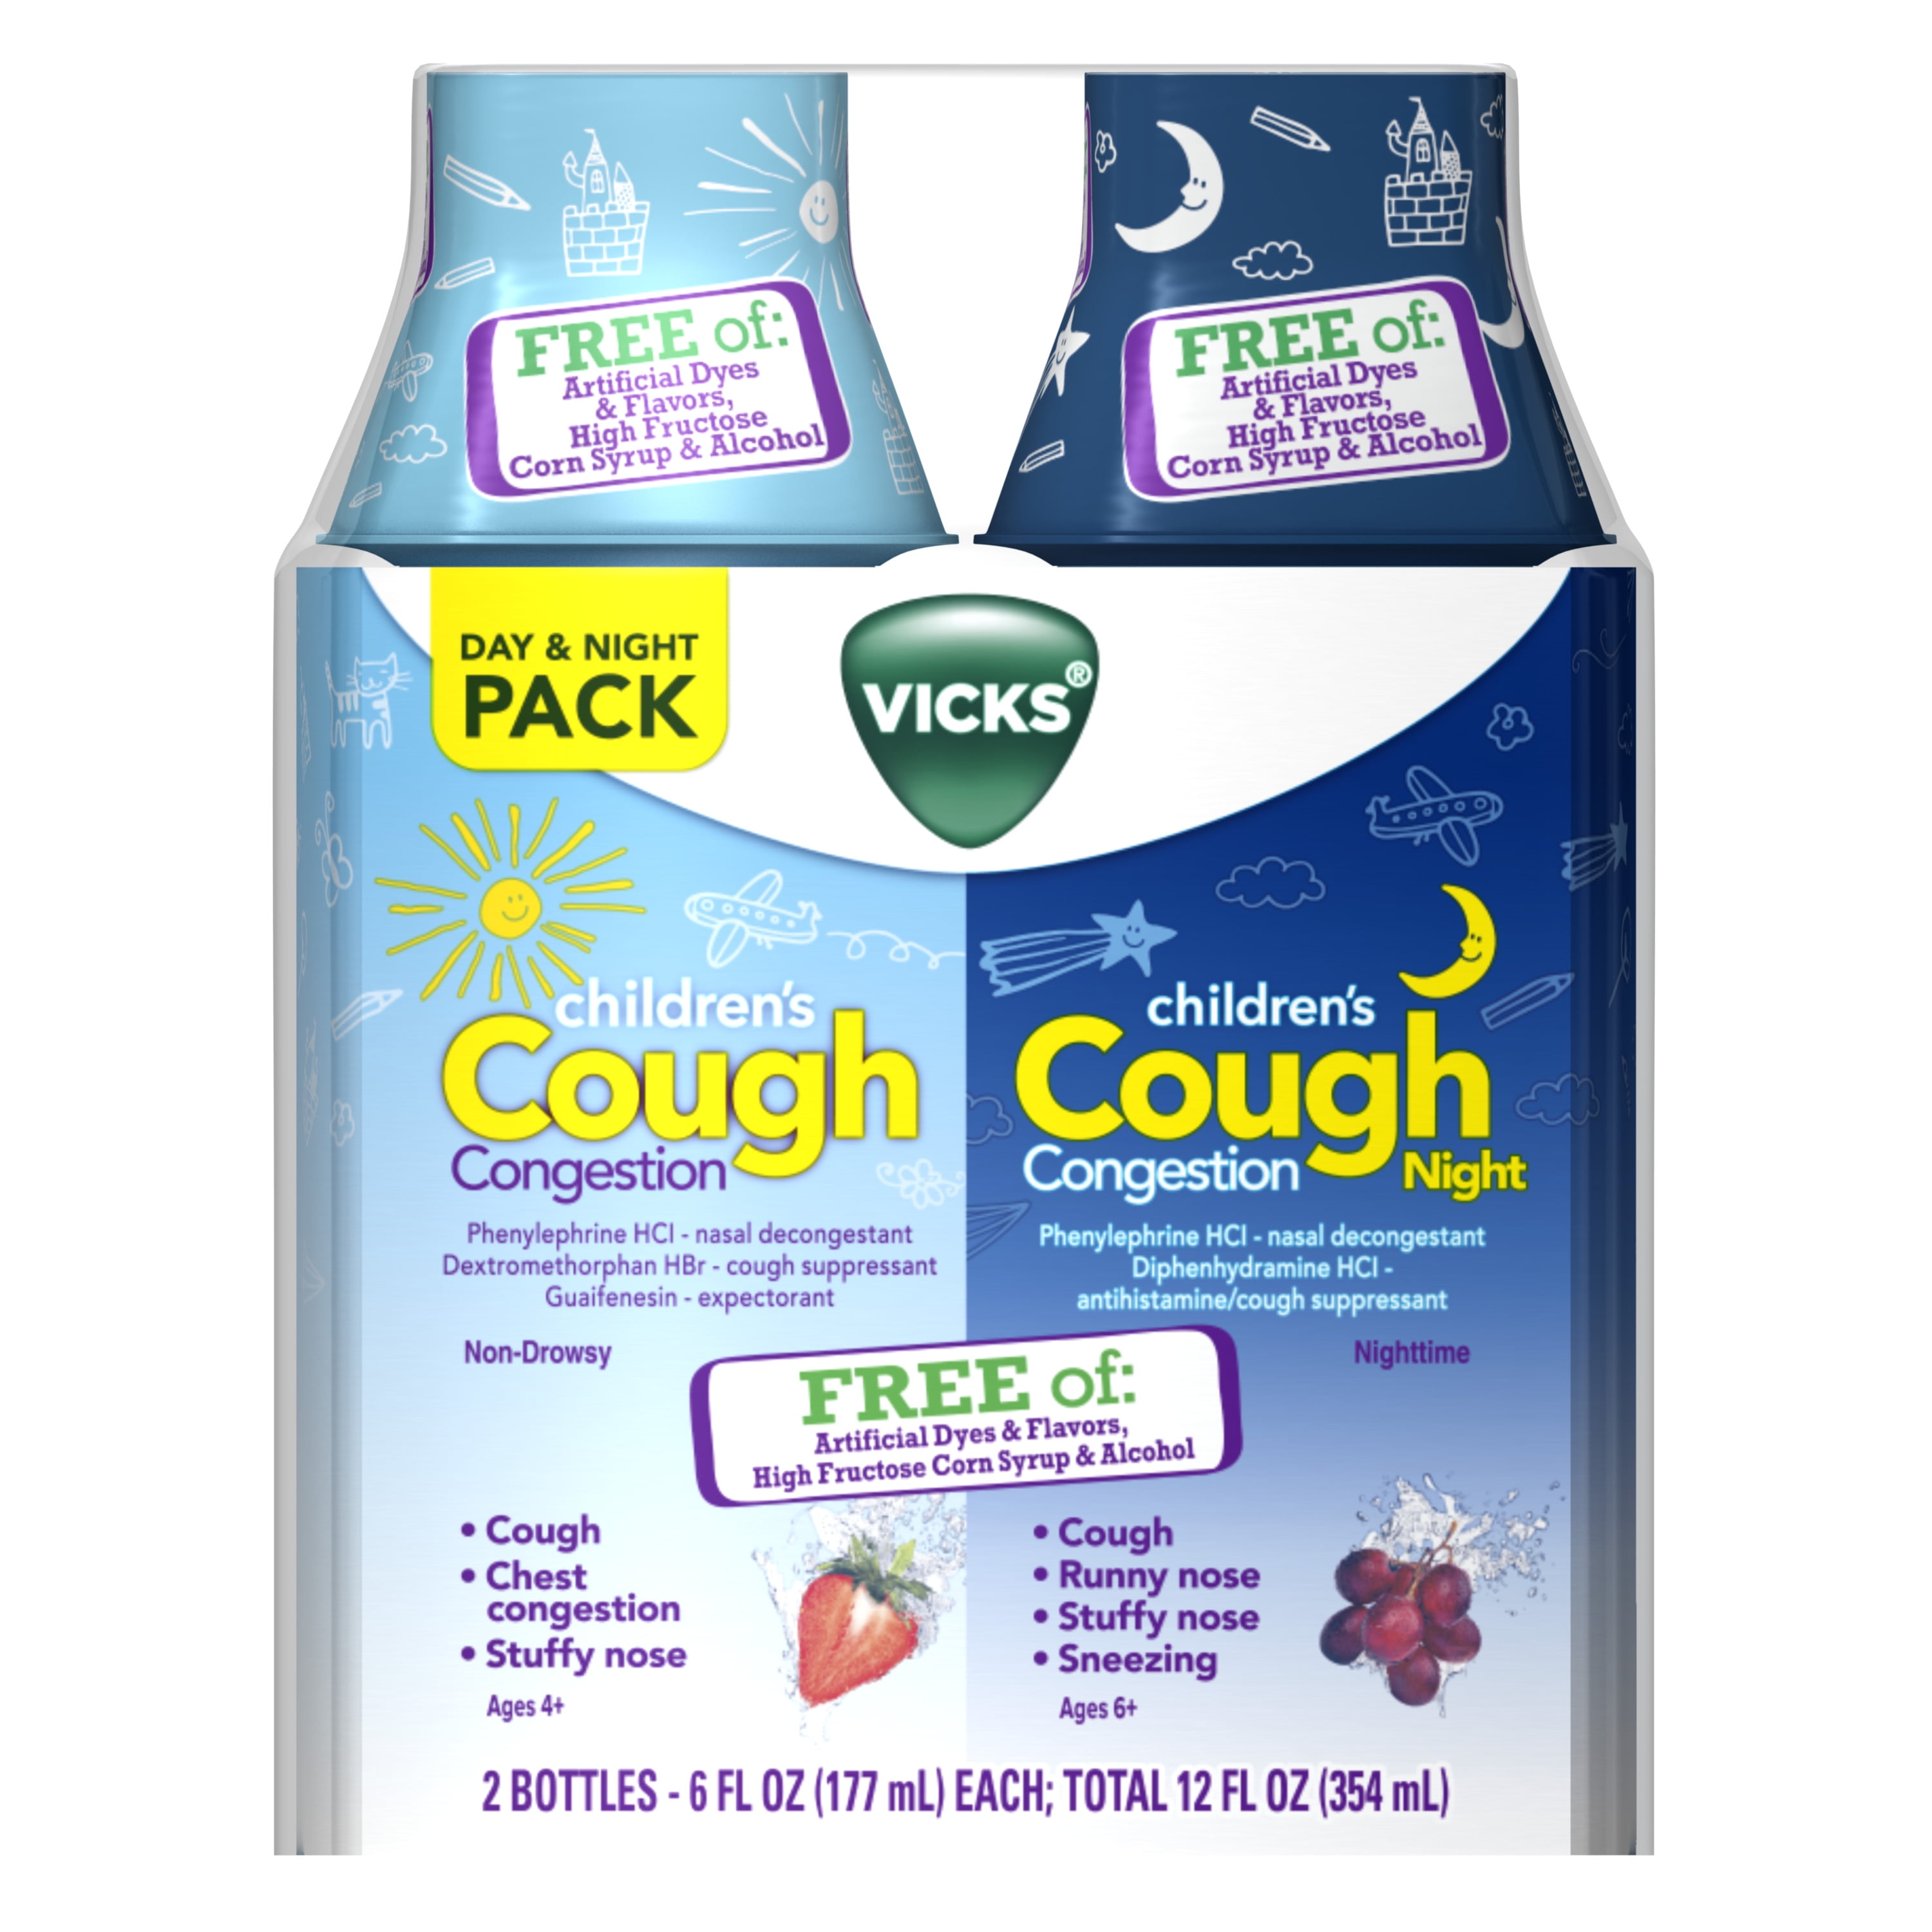 How To Get Rid Of Covid Cough At Night